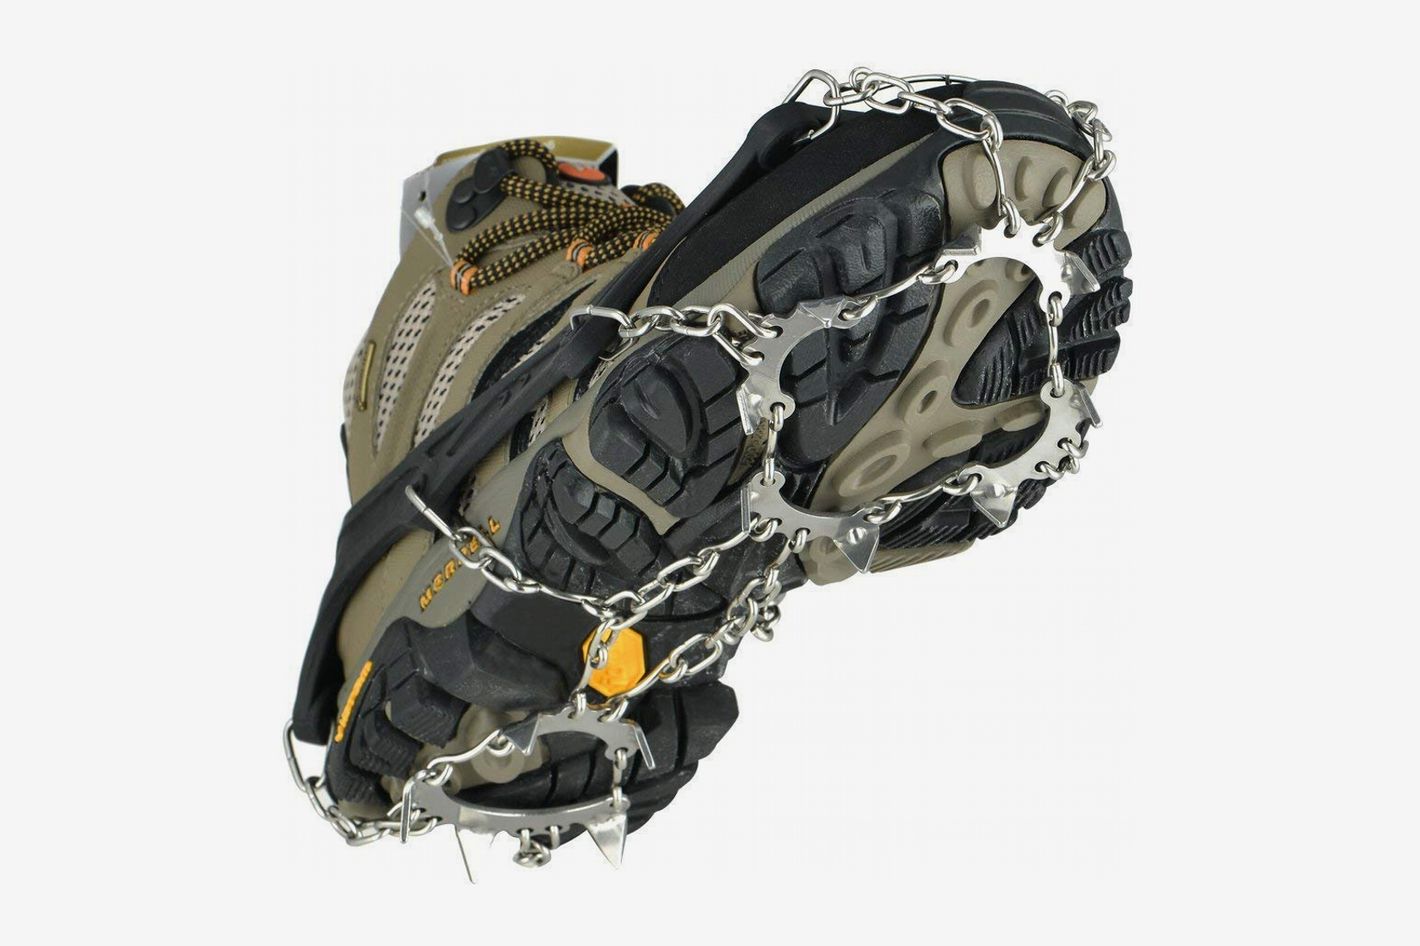 Jogging Unigear Traction Cleats Ice Snow Grips with 18 Spikes,Crampons for Walking Climbing and Hiking 